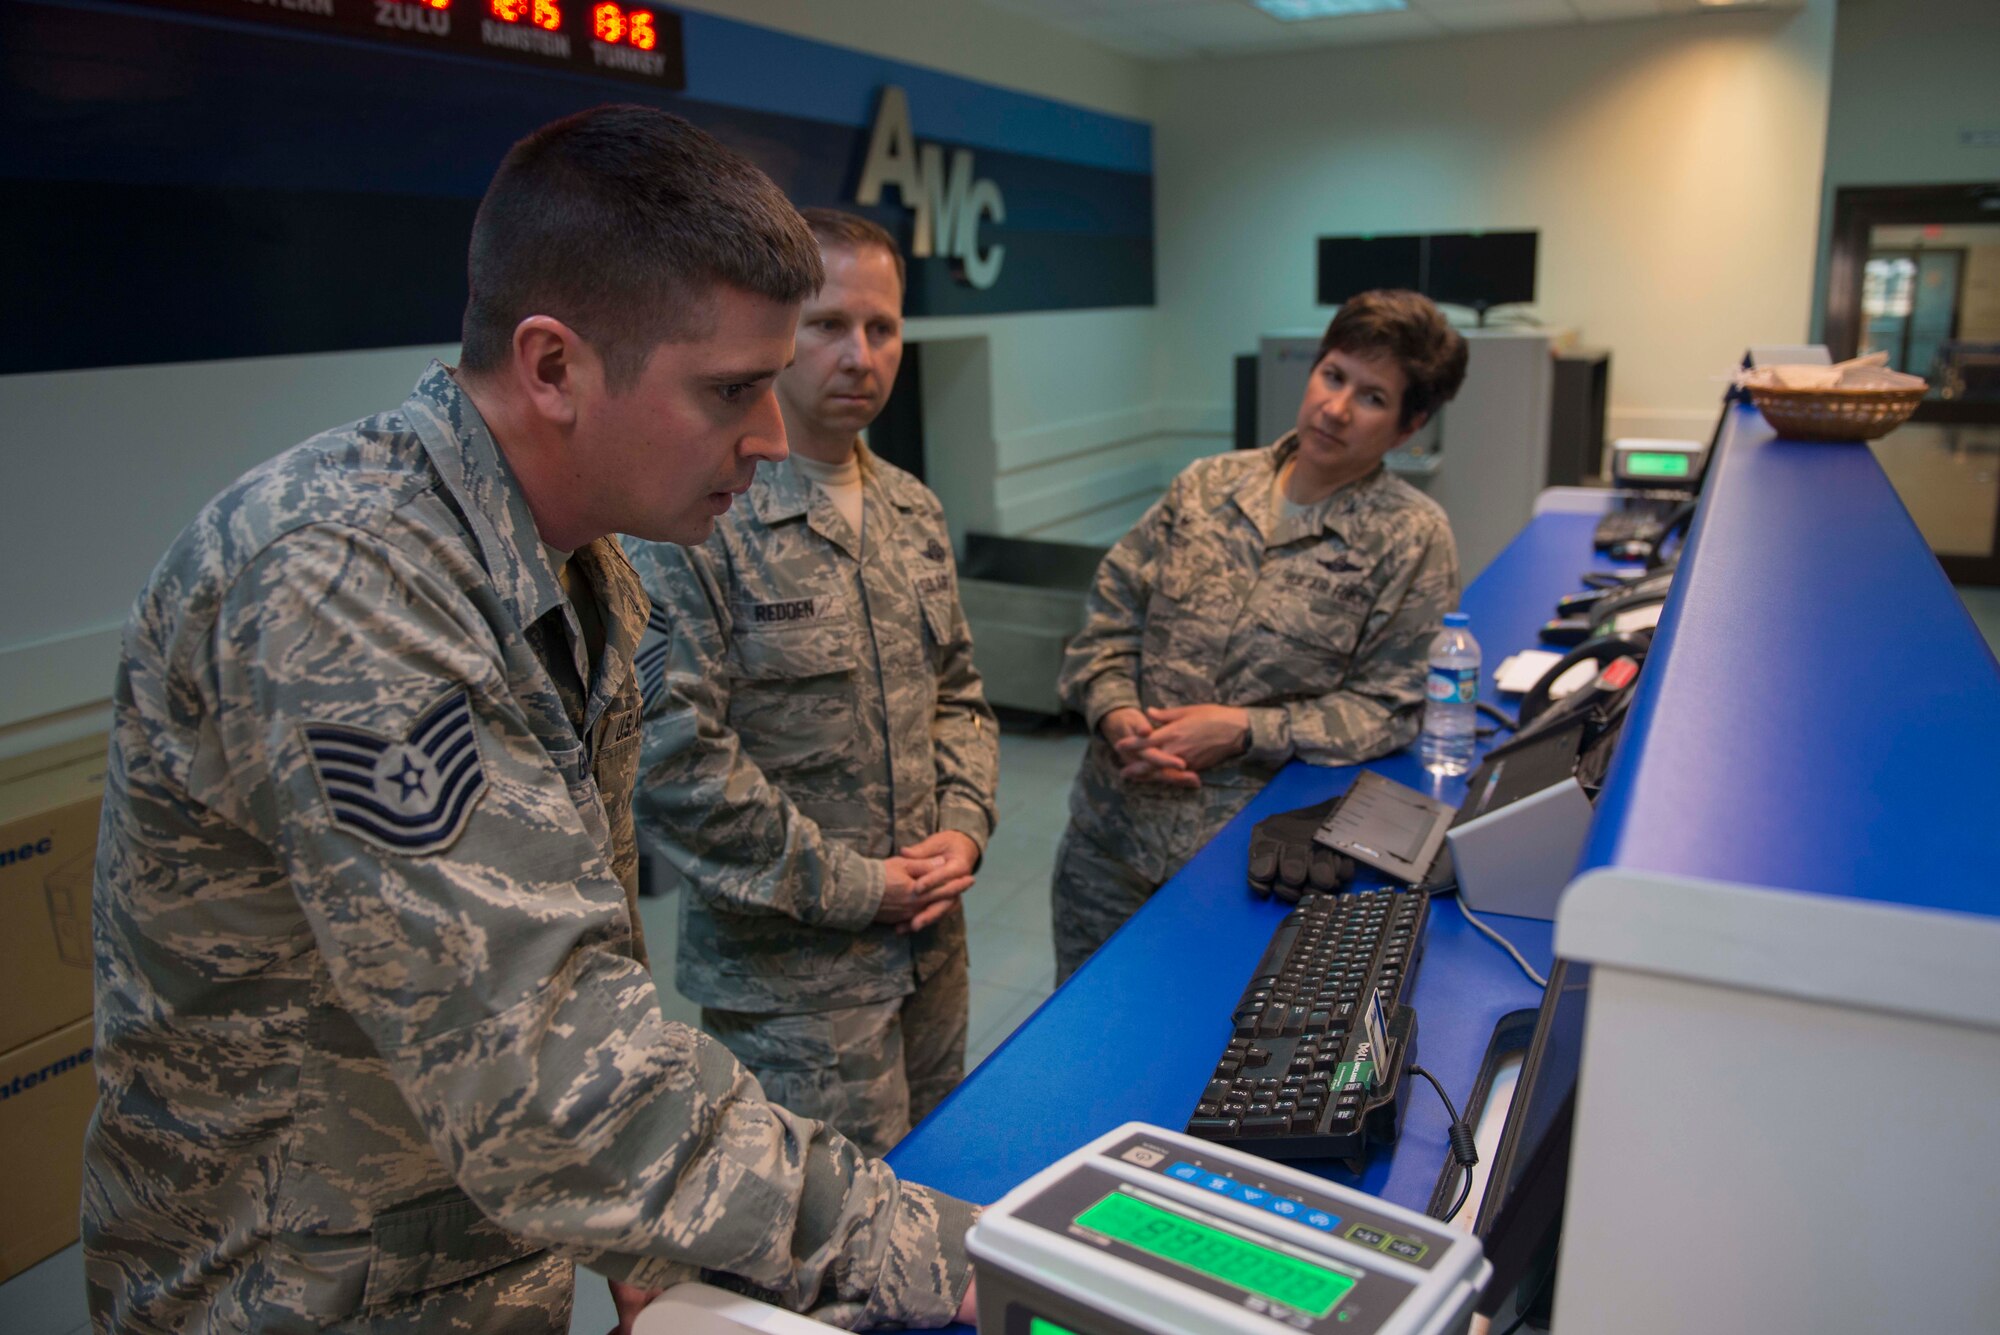 U.S. Air Force Tech. Sgt. Steven Gray, 728th Air Mobility Squadron passenger service supervisor, explains passenger terminal procedures to U.S. Air Force Chief Master Sgt. Mark Redden, 521st Air Mobility Operations Wing command chief, and U.S. Air Force Col. Nancy Bozzer, 521st AMOW commander, April 4, 2016, at Incirlik Air Base, Turkey. During their visit, Bozzer and Redden toured the 728th AMS facilities and interacted with Airmen throughout the day. (U.S. Air Force photo by Senior Airman John Nieves Camacho/Released)